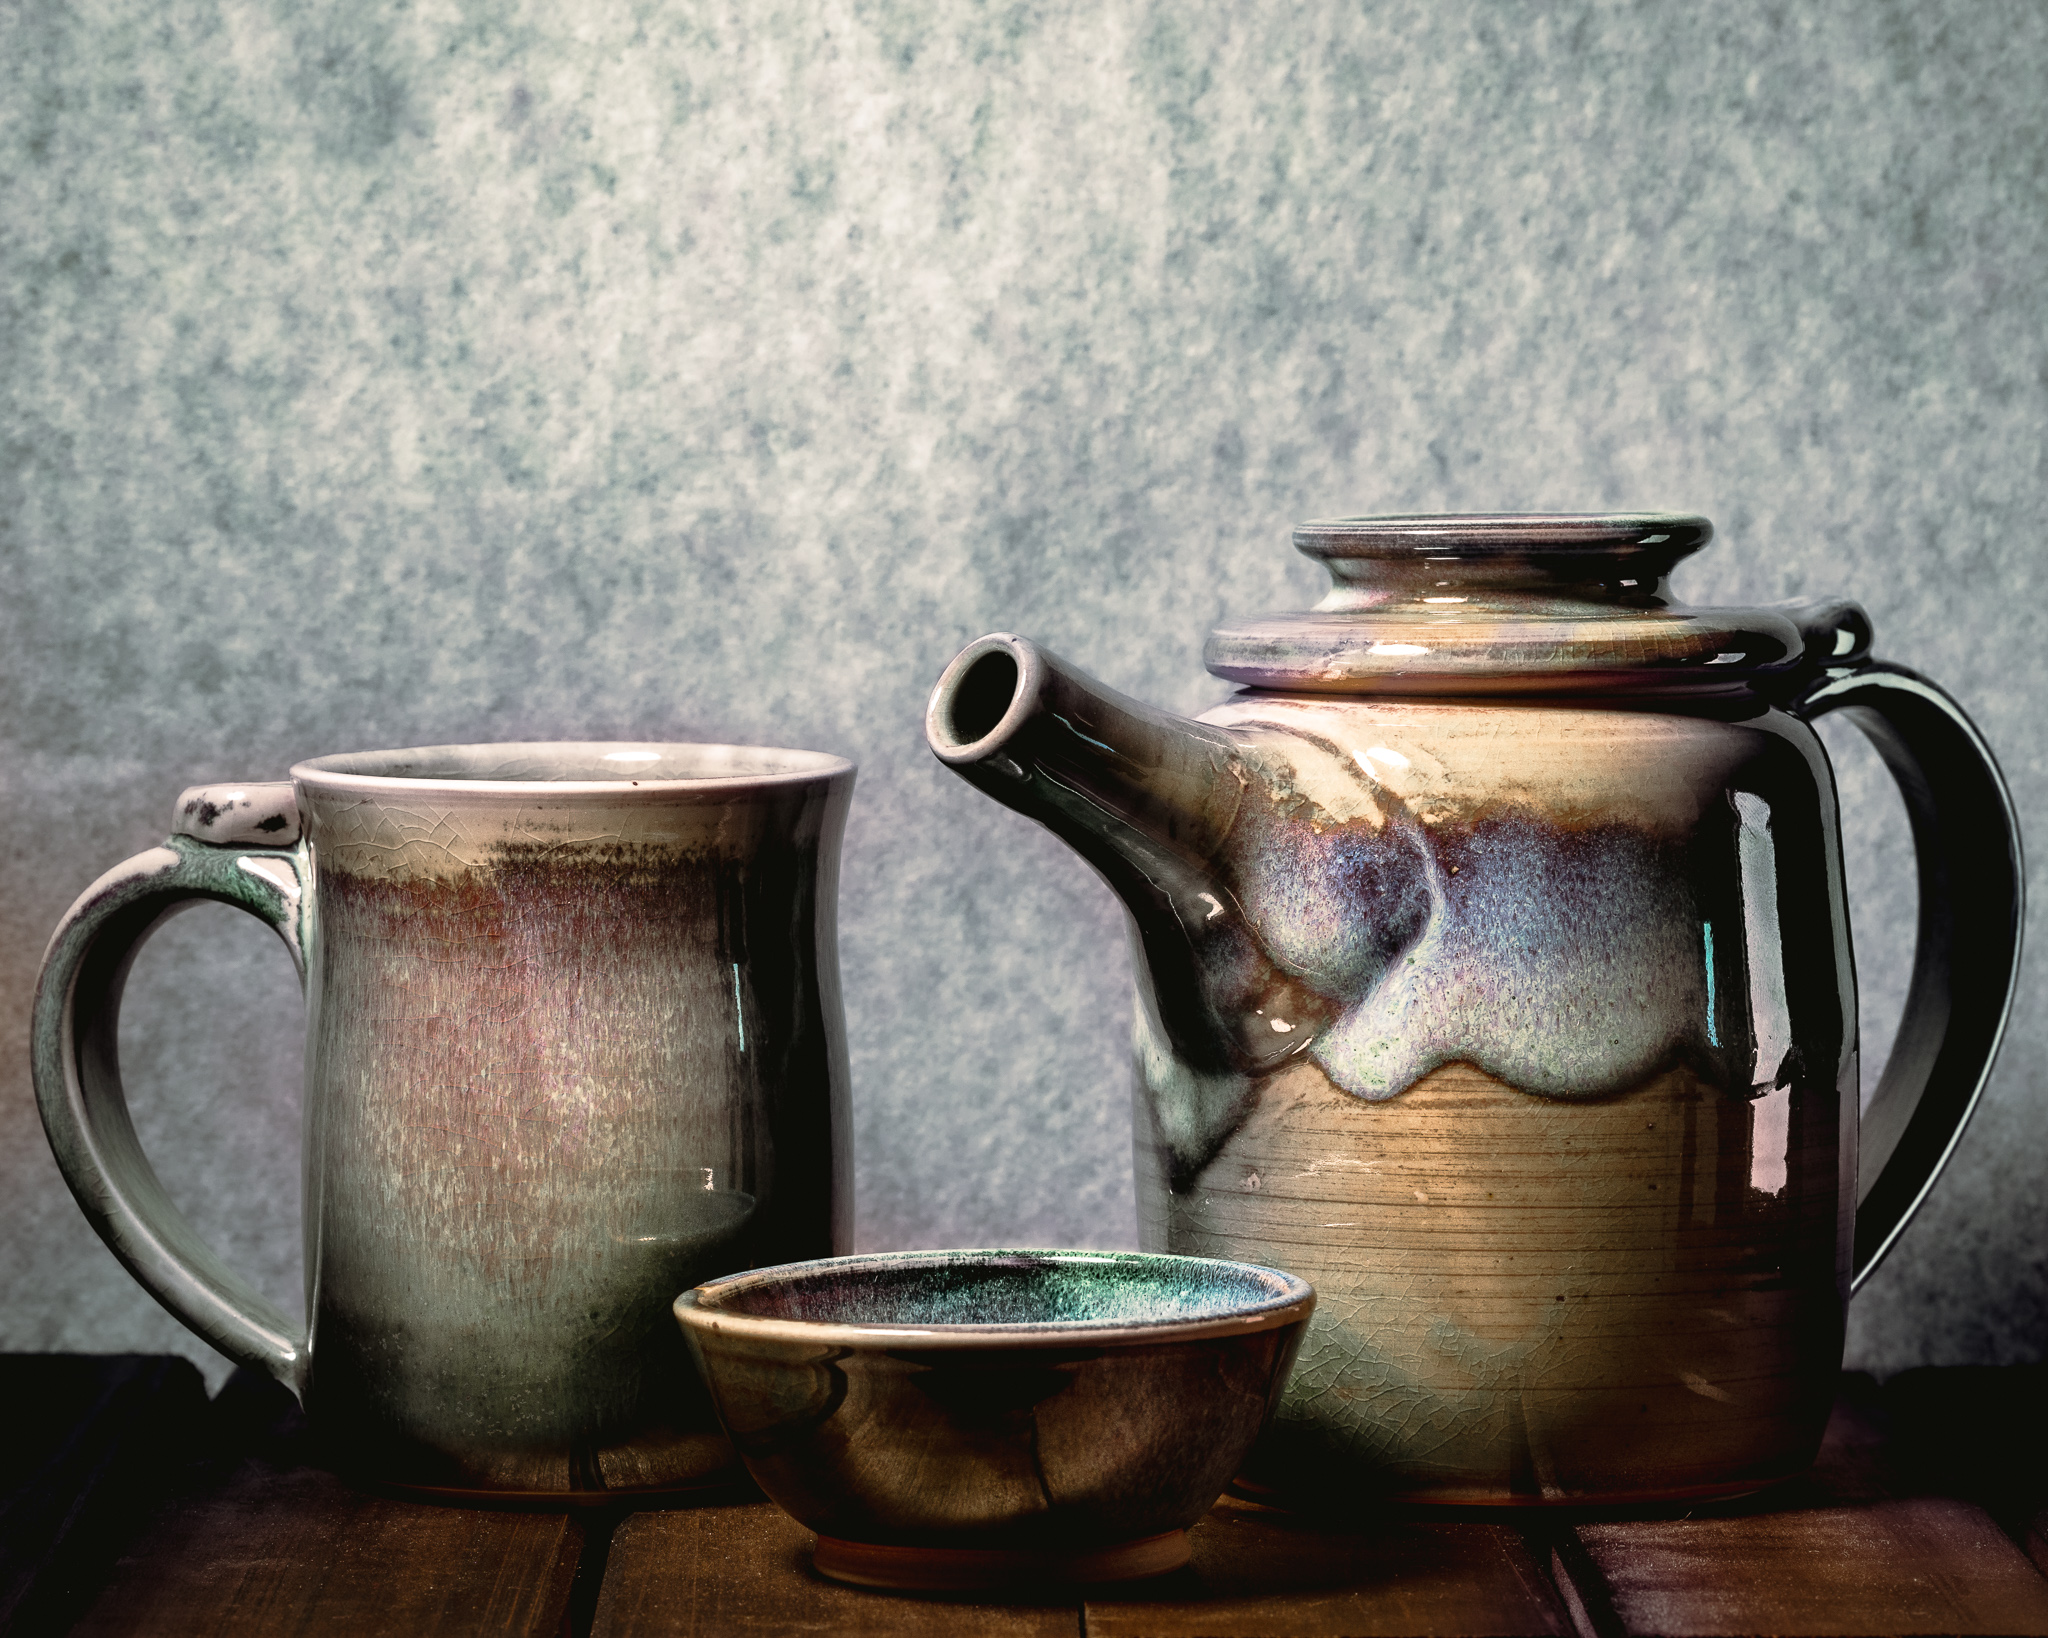 A teaset of handmade ceramic goods, consisting of a mug, and dish, and a teapot.